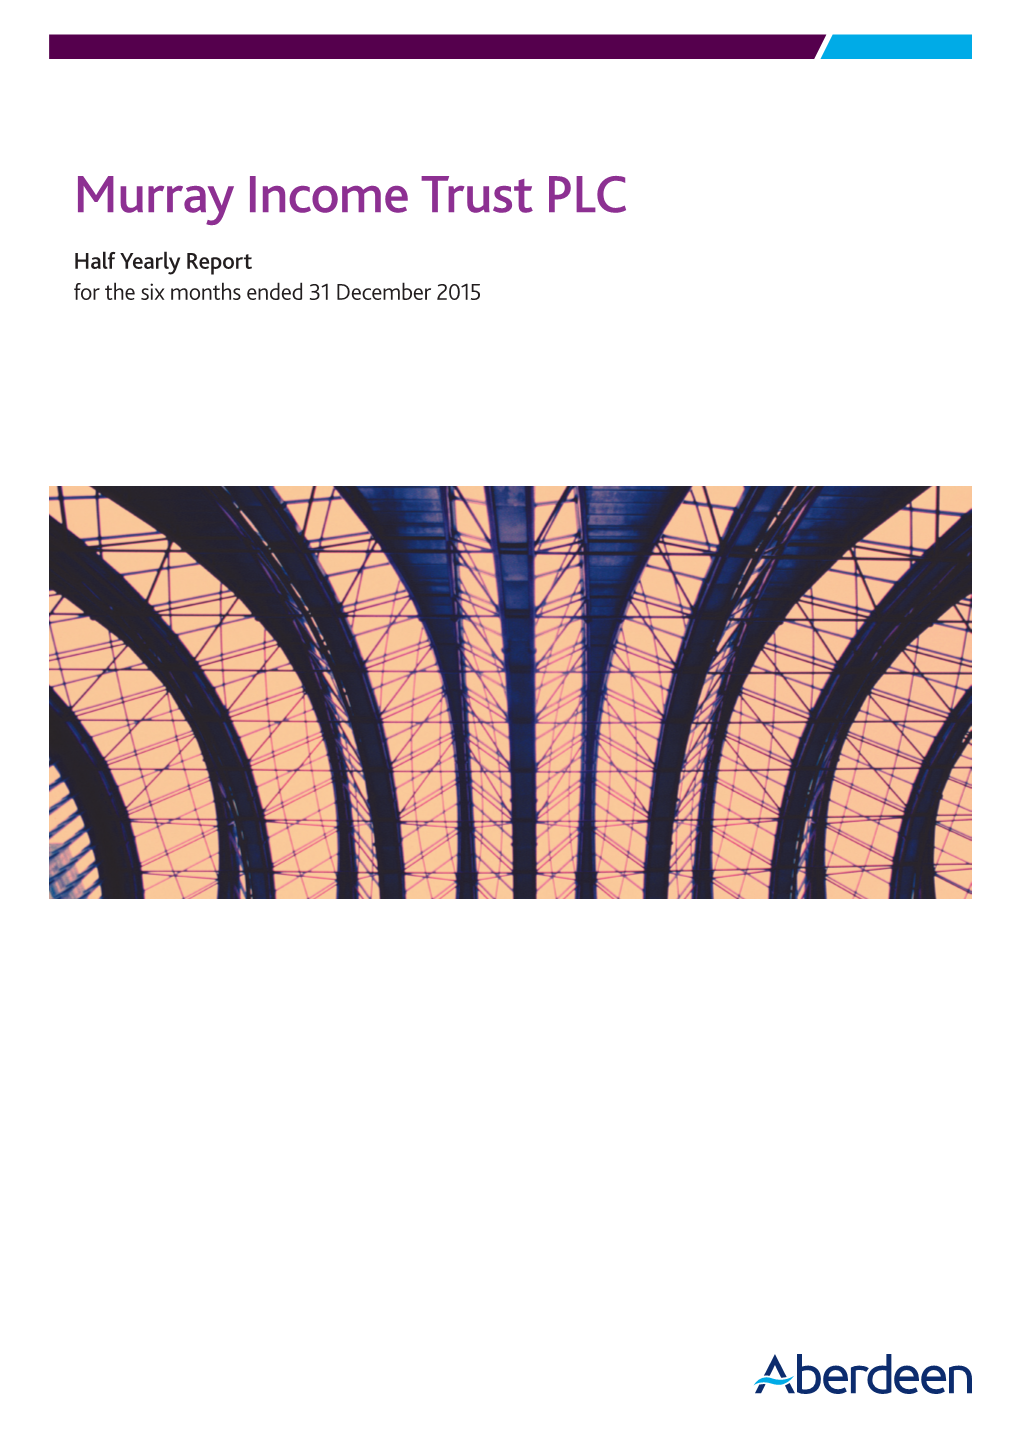 Murray Income Trust PLC Half Yearly Report for the Six Months Ended 31 December 2015 Contents